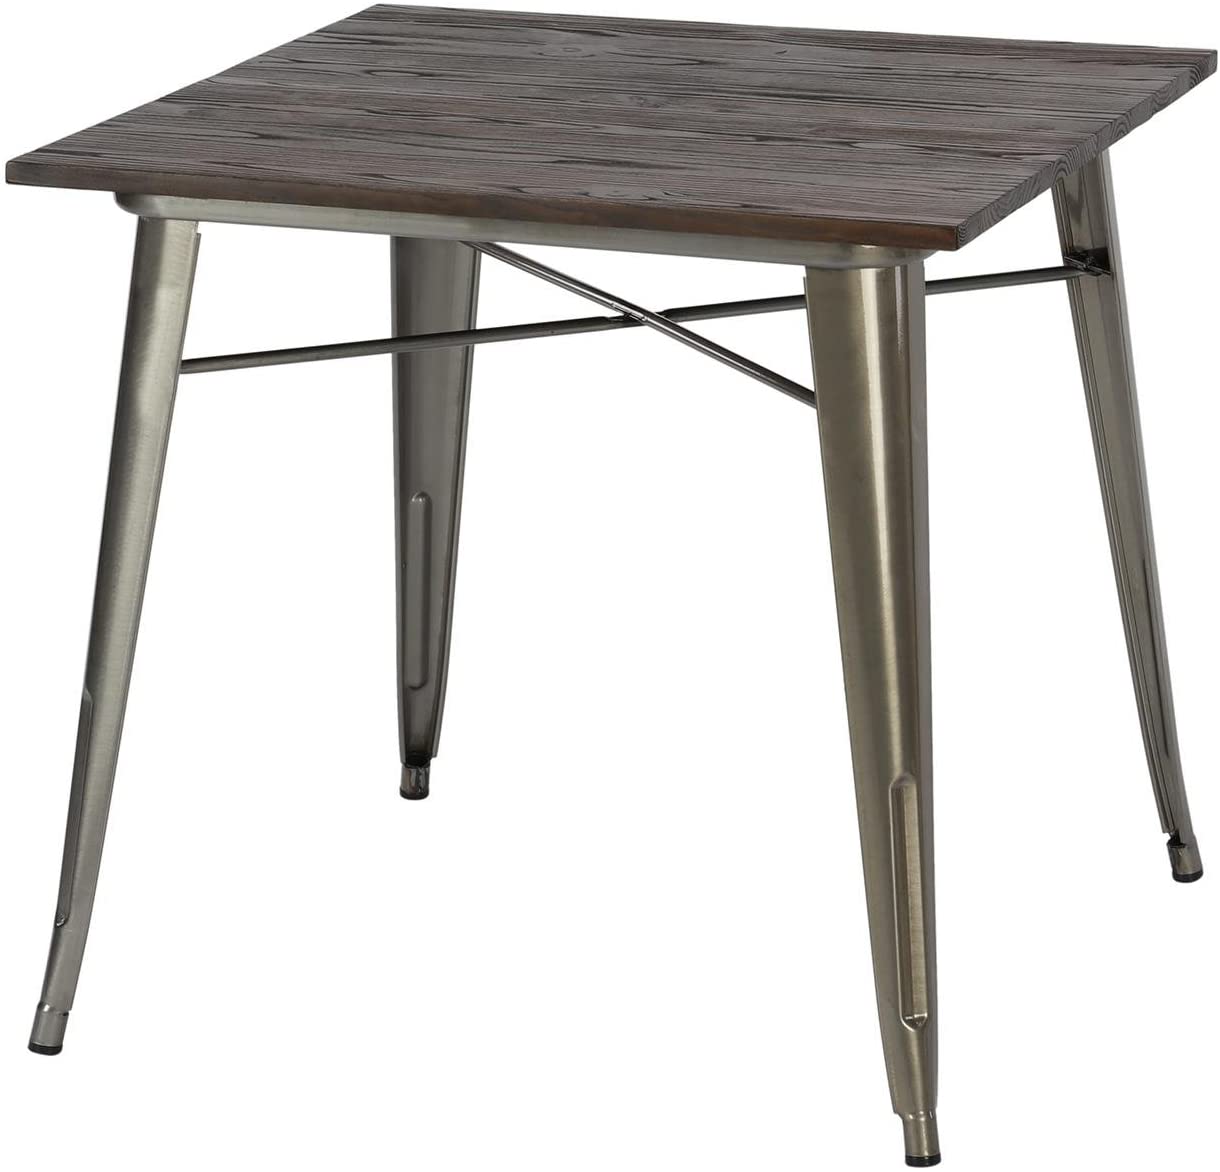 DHP Fusion Metal & Wood 31.5-Inch Square Dining Table